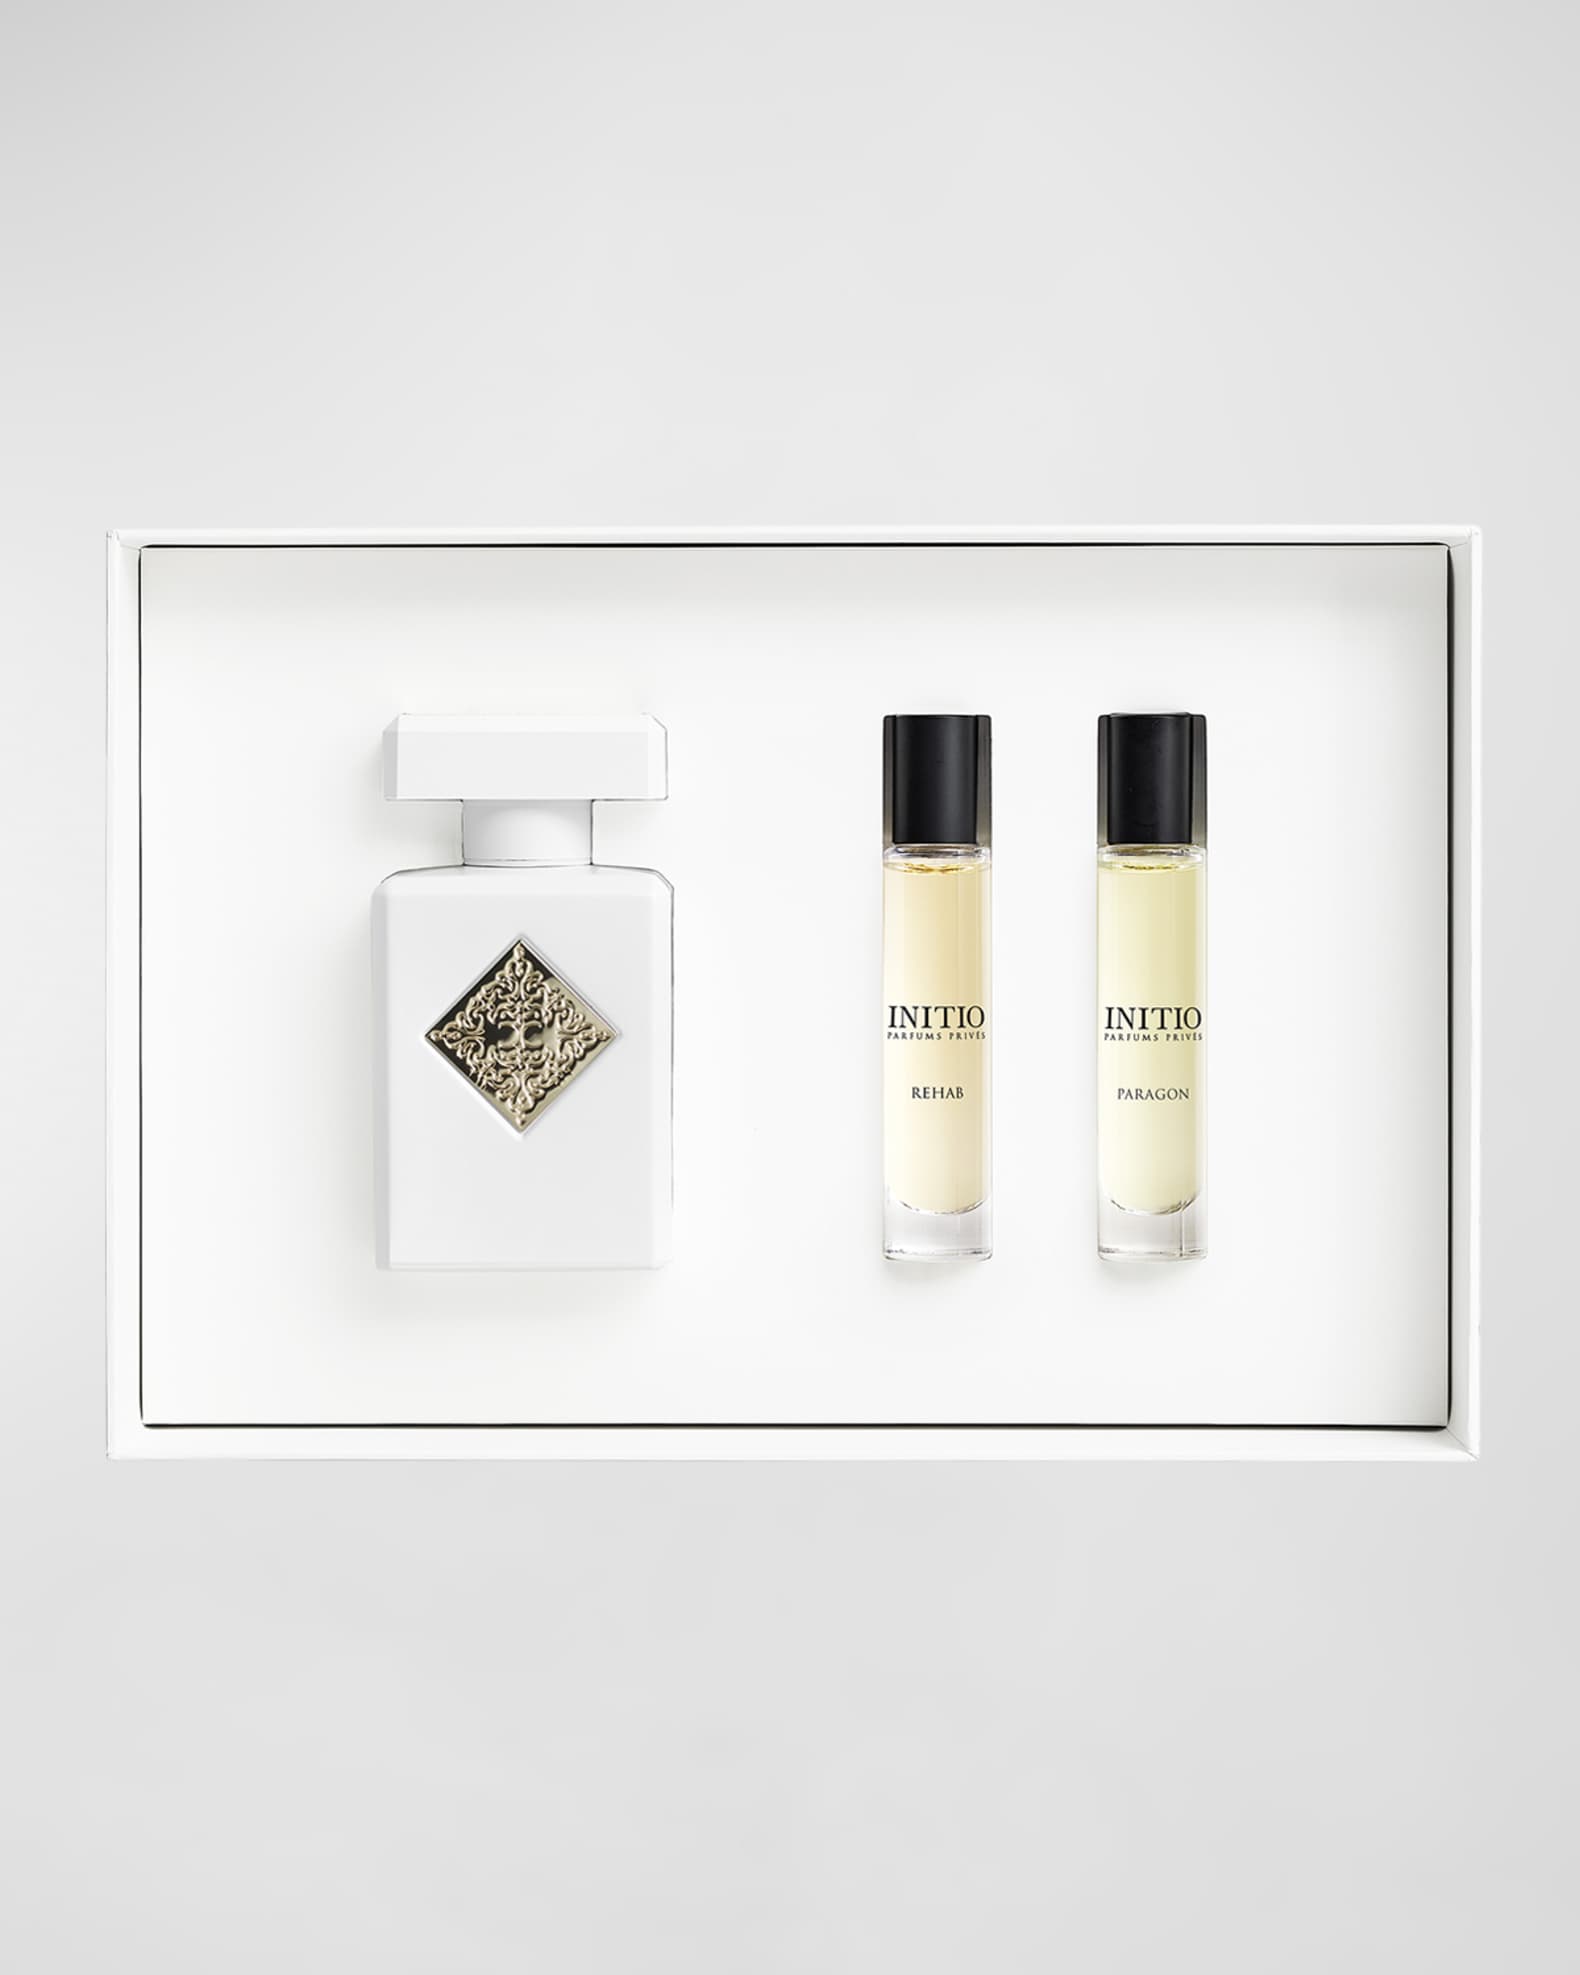 Louis Vuitton's travel-size atomizers  Travel size products, Box packaging  design, Perfume